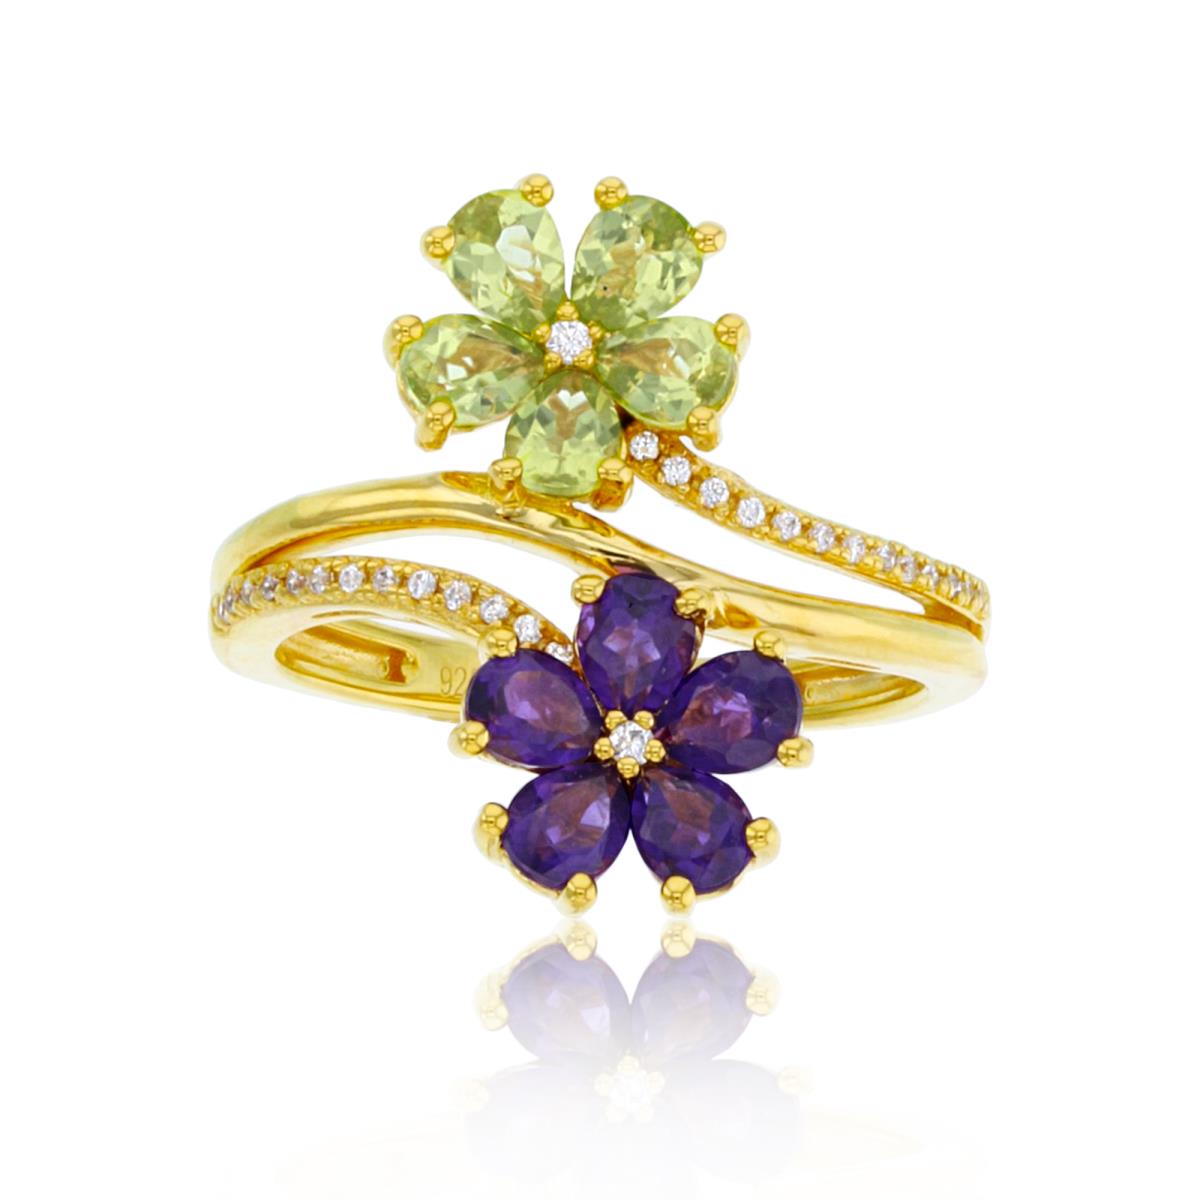 Sterling Silver 14K Yellow Gold 0.10cttw Rnd Diam & 4x3mm PS Amethyst/Peridot Flowers Ring